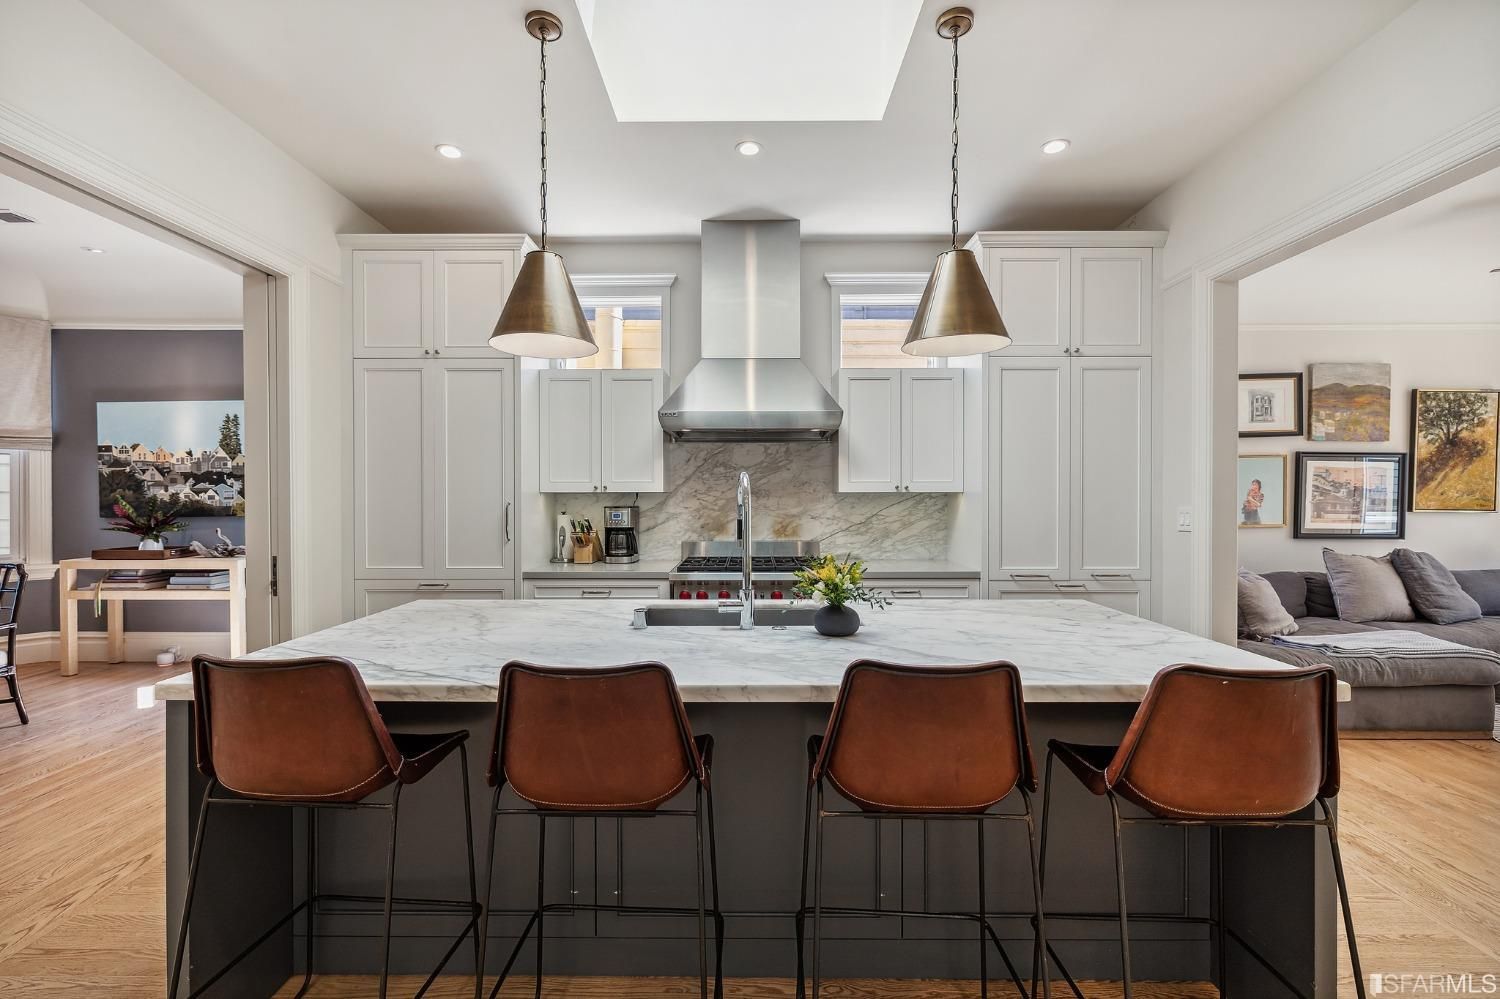 Property Photo: View of the large kitchen island with seating for four people